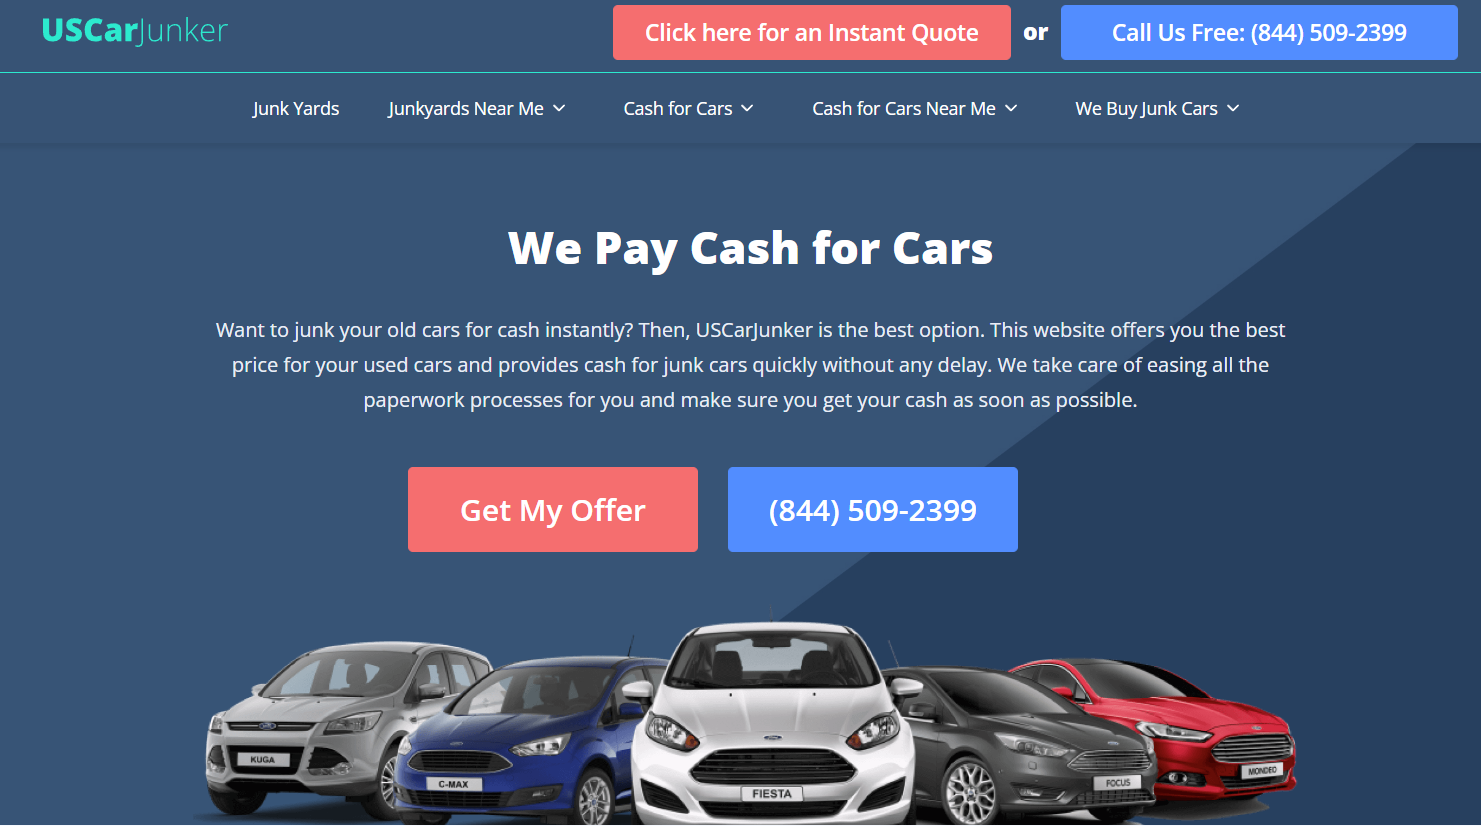 What Are the Benefits of Using a Cash for Car Service